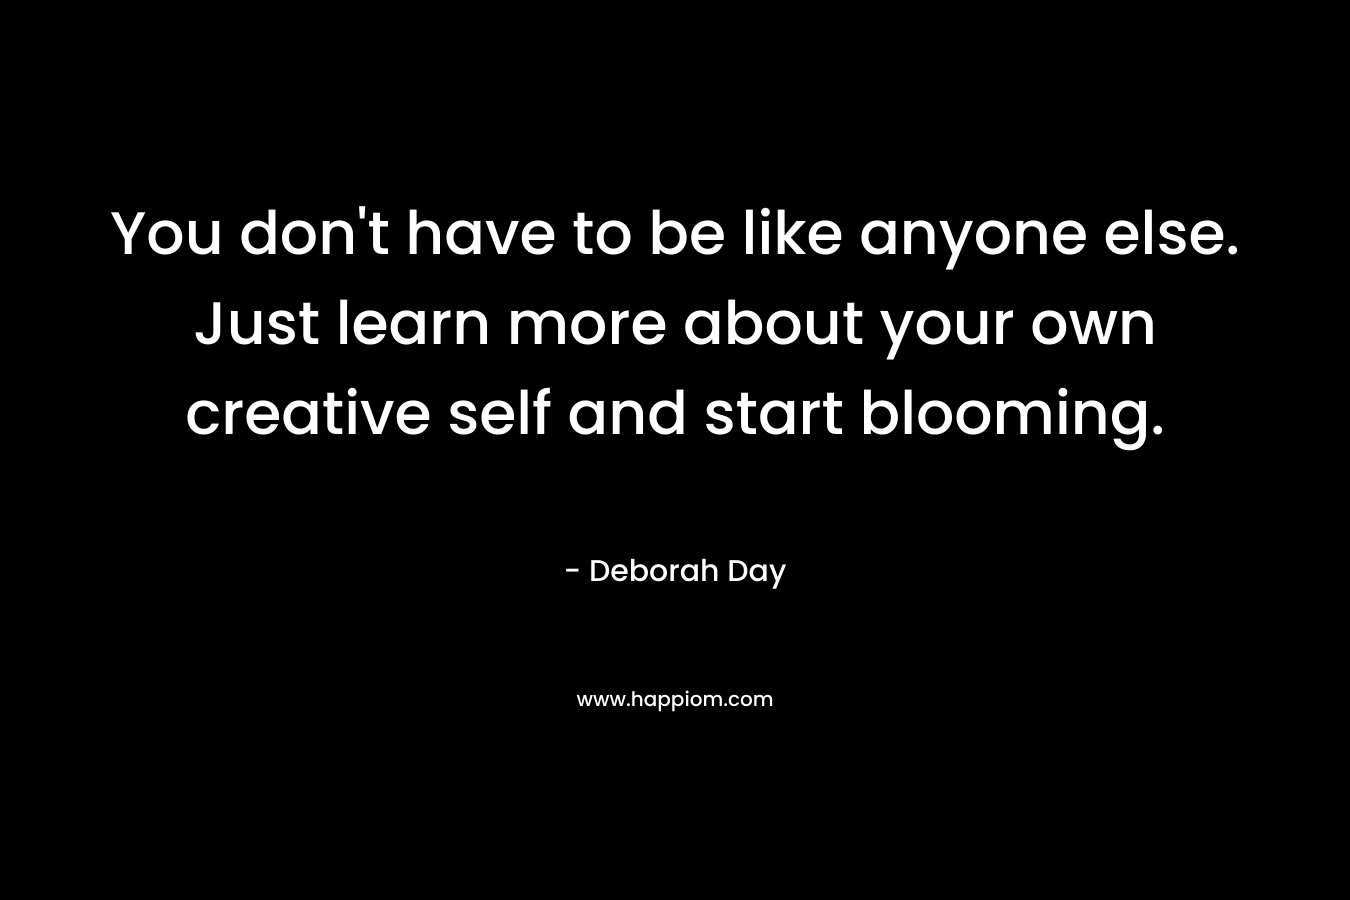 You don’t have to be like anyone else. Just learn more about your own creative self and start blooming. – Deborah Day